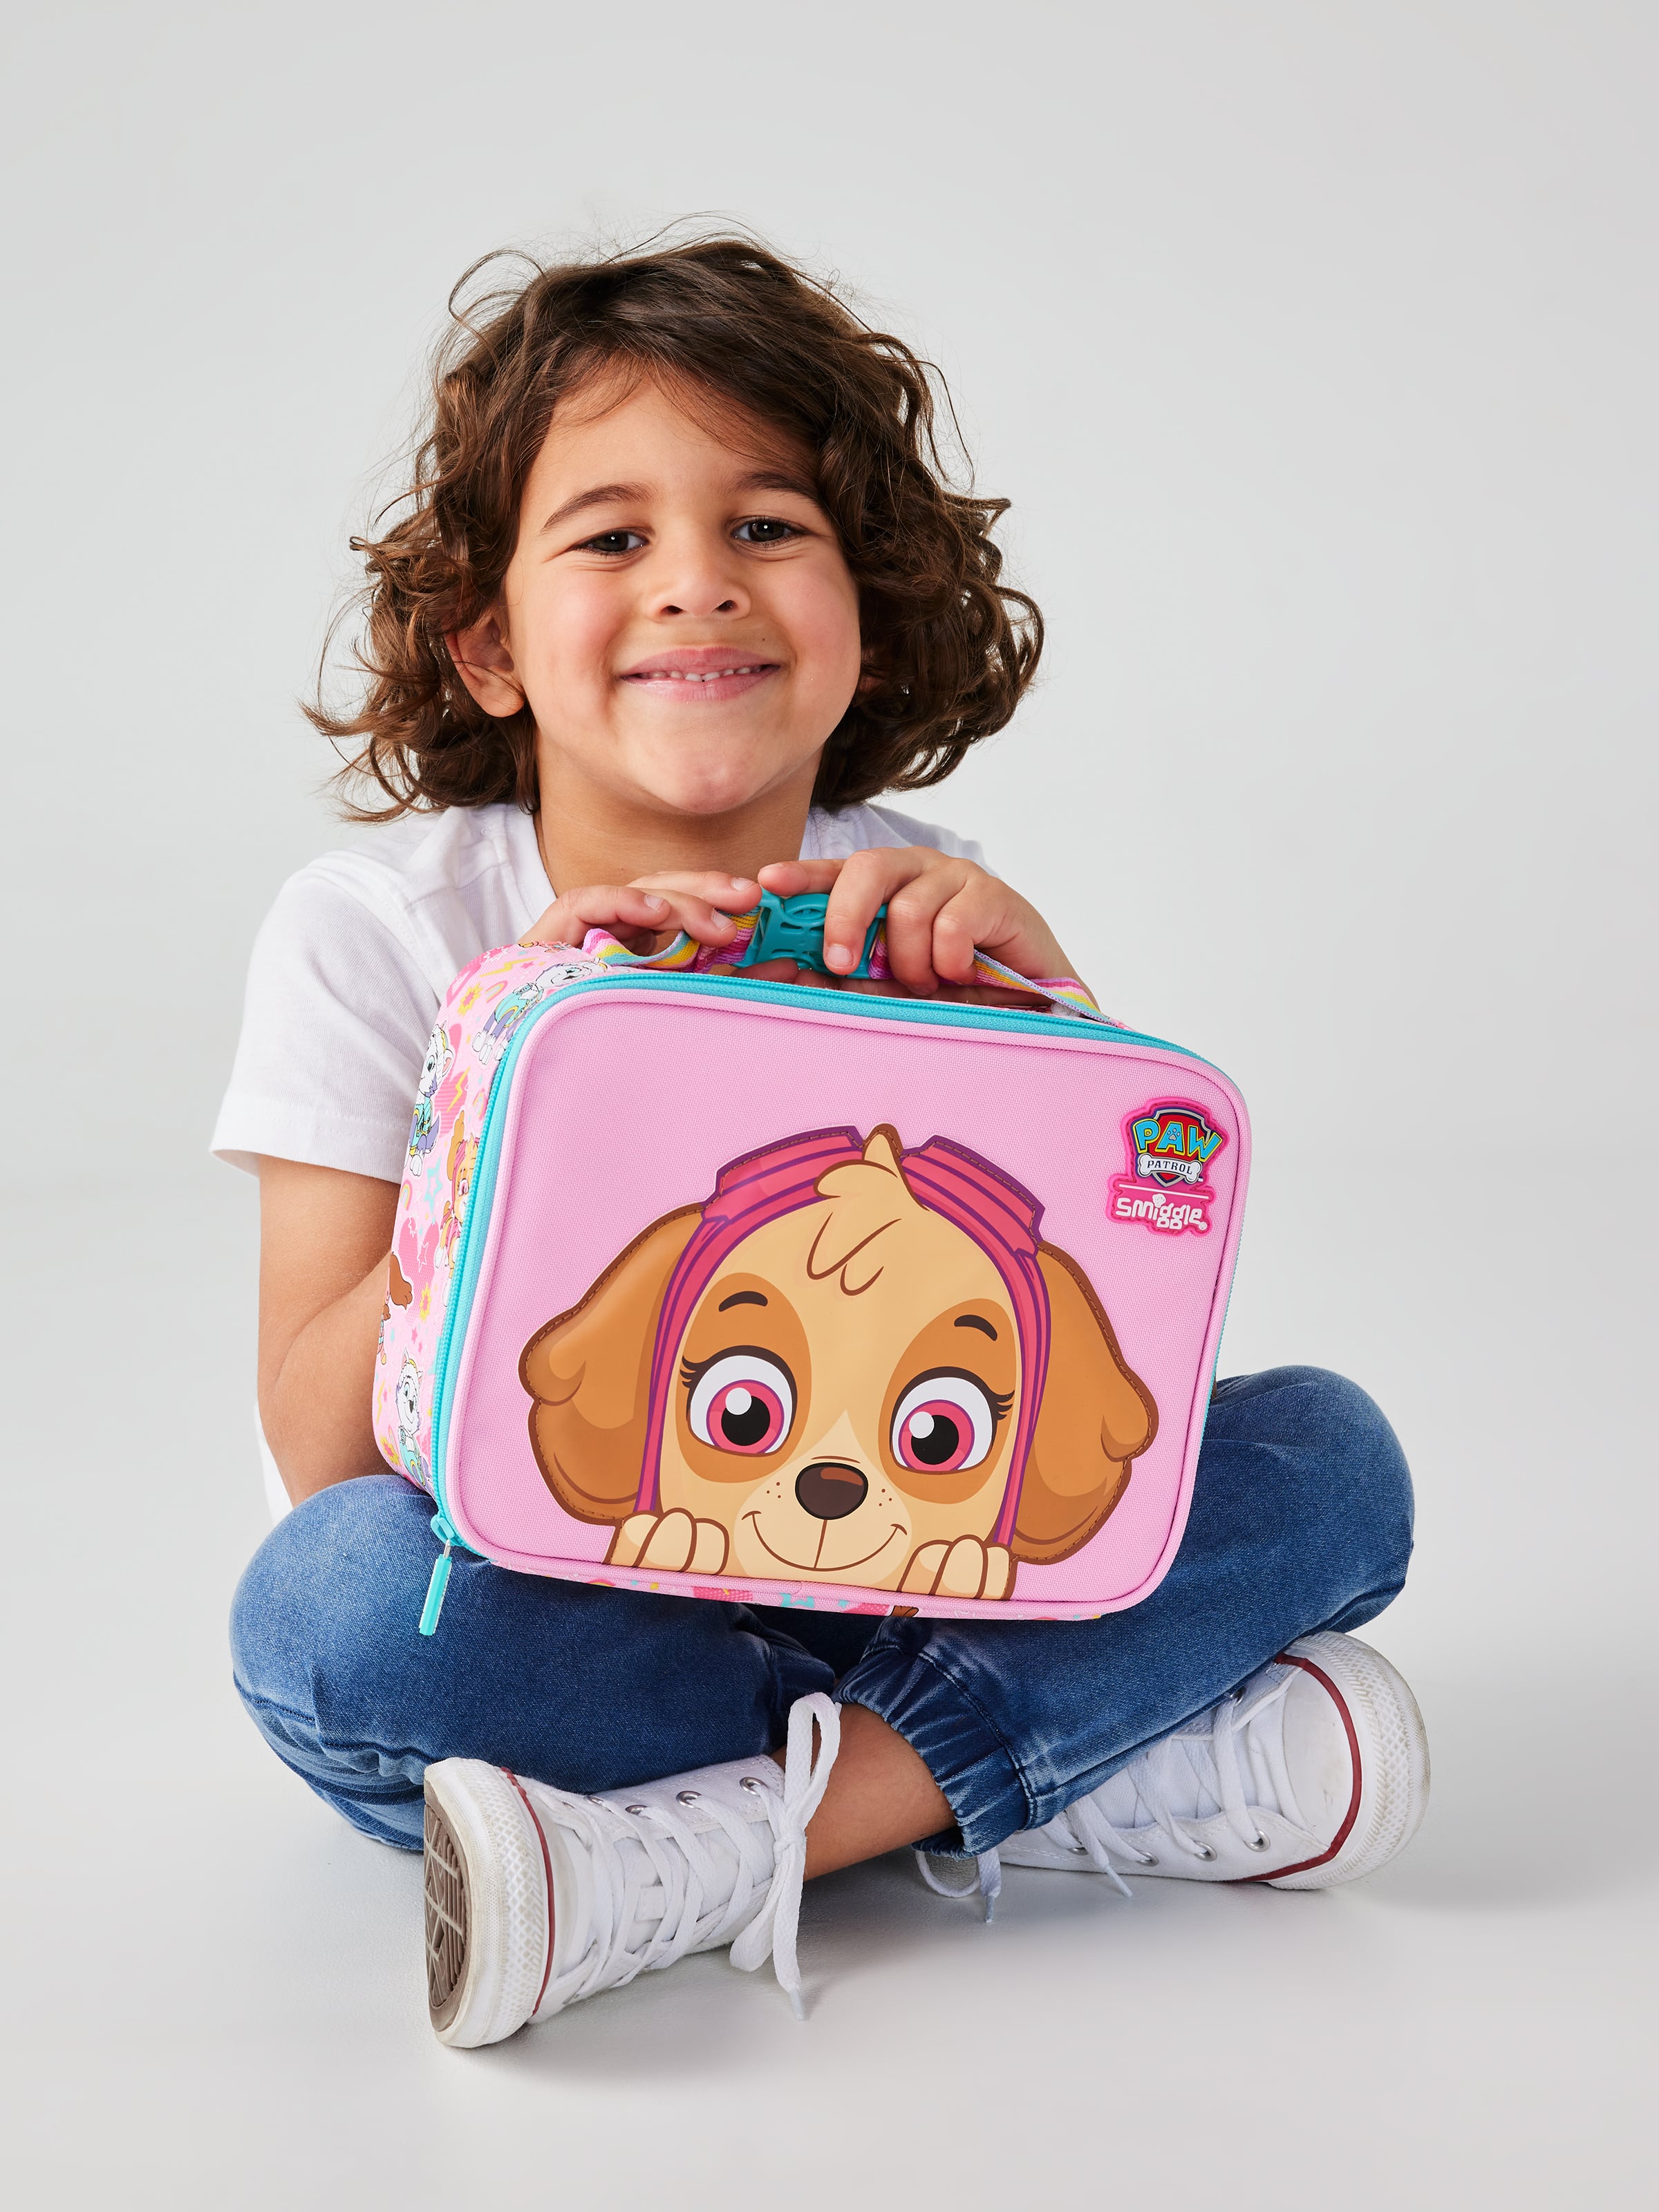 Smiggle: Get the set in 1 easy click! 20% off bundles ends tonight